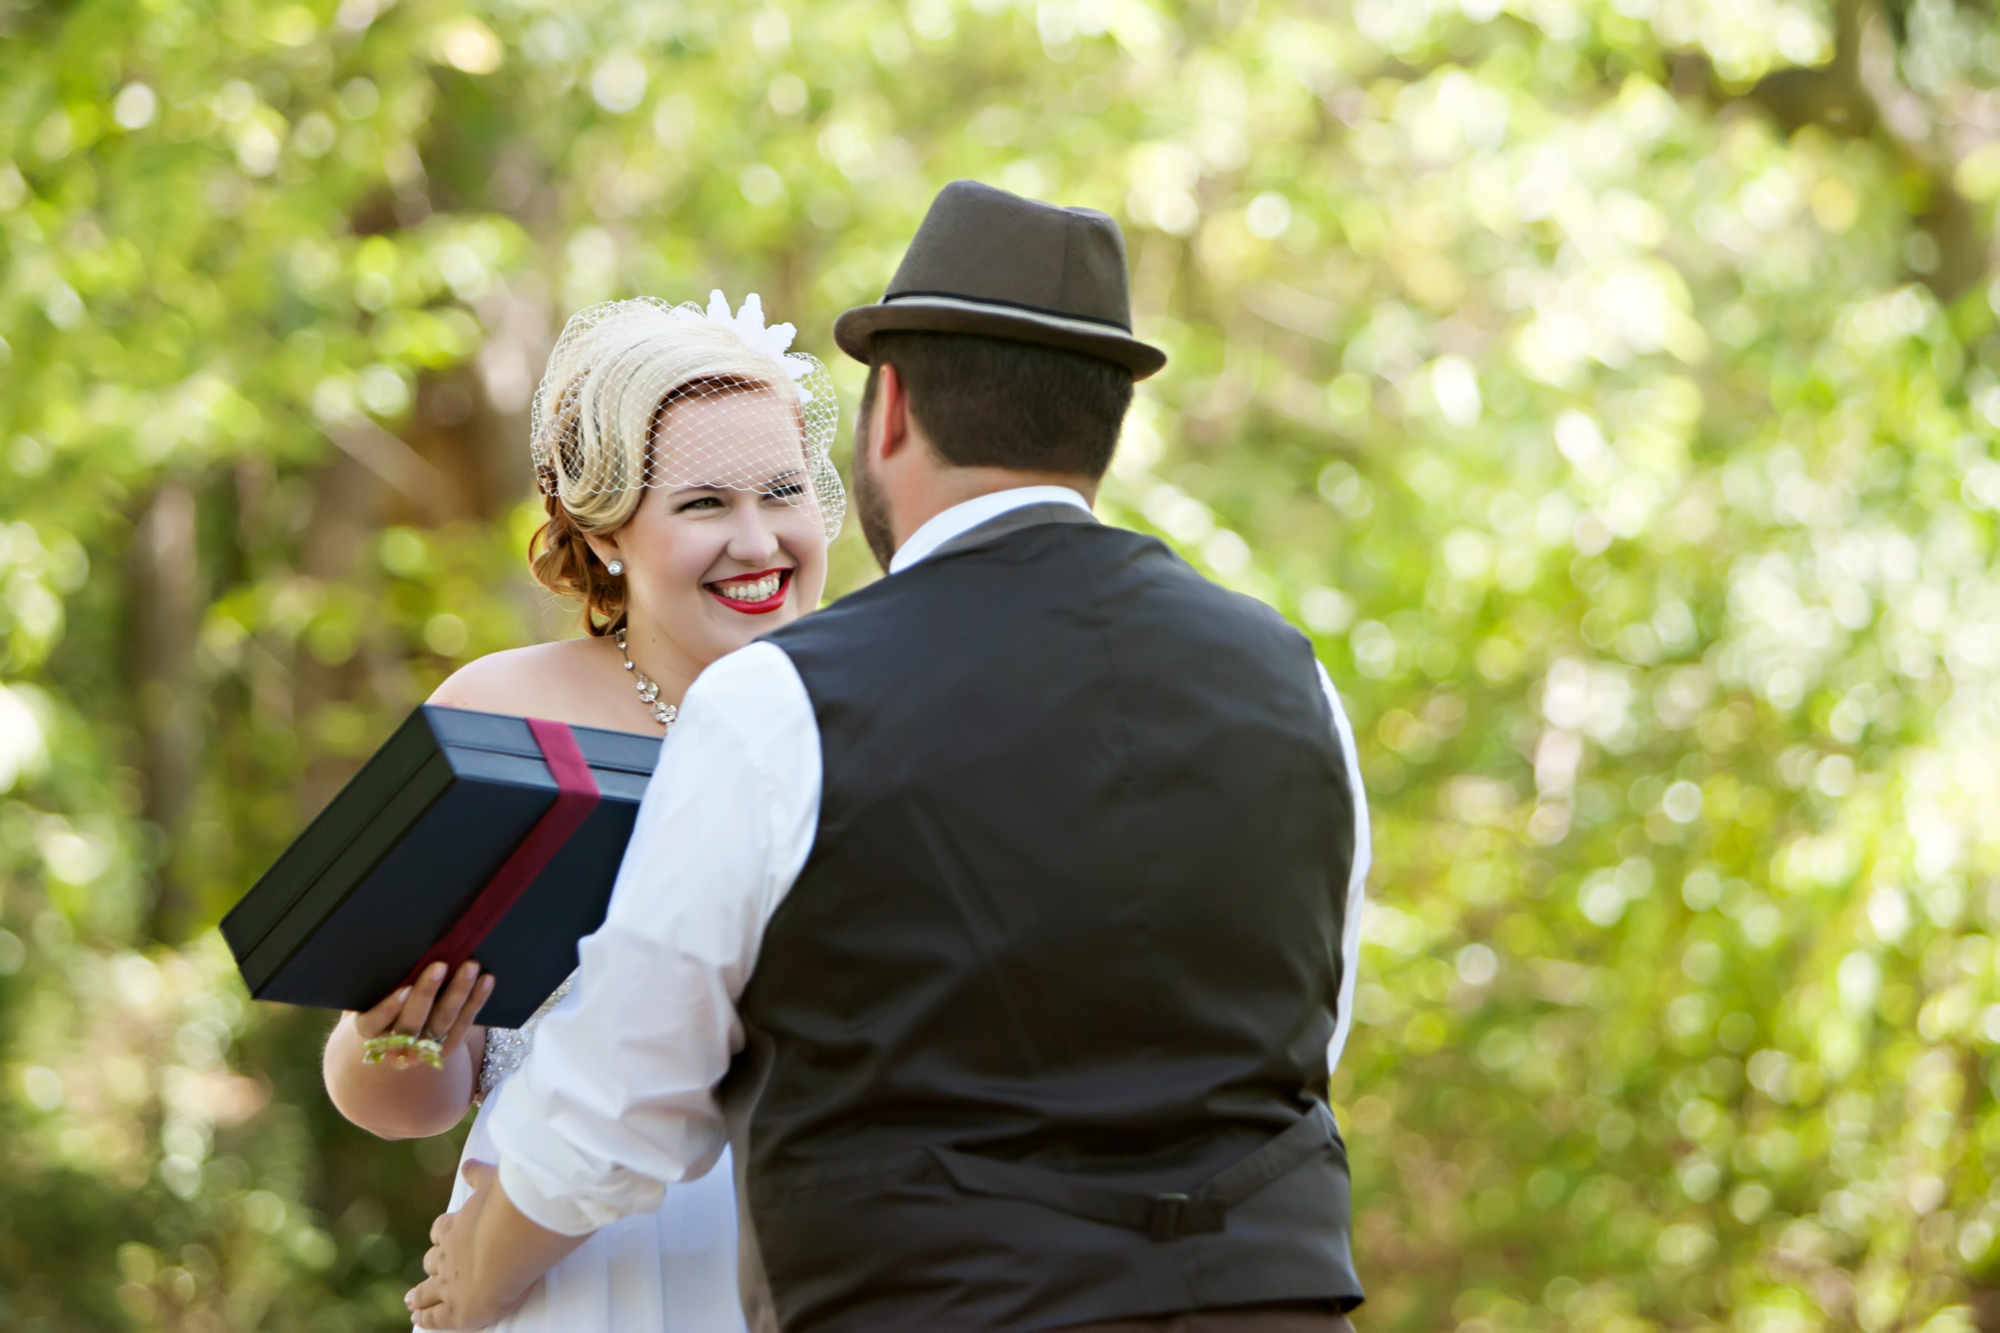    “Other than saying “yes” when my groom proposed, hiring SilverBox was the best decision I made when planning our wedding.”      Christa Talmage, bride    